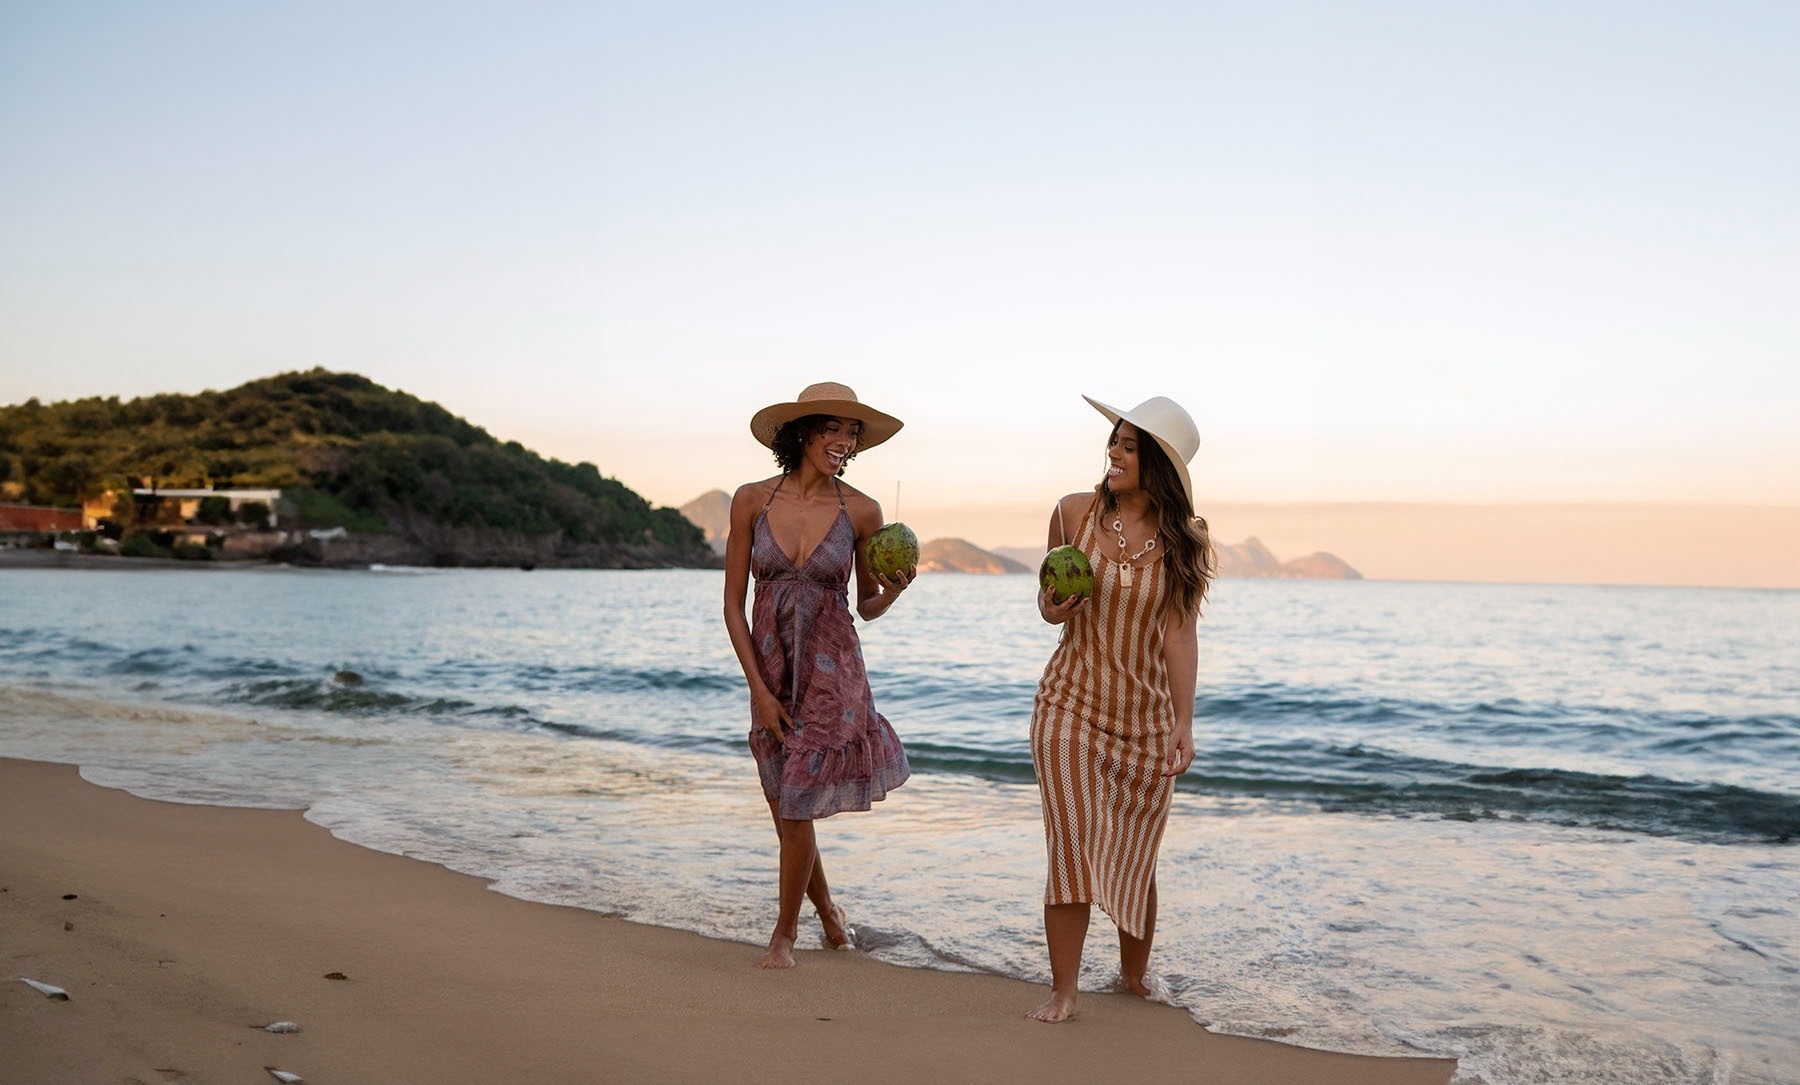 two women walking on the beach holding coconuts